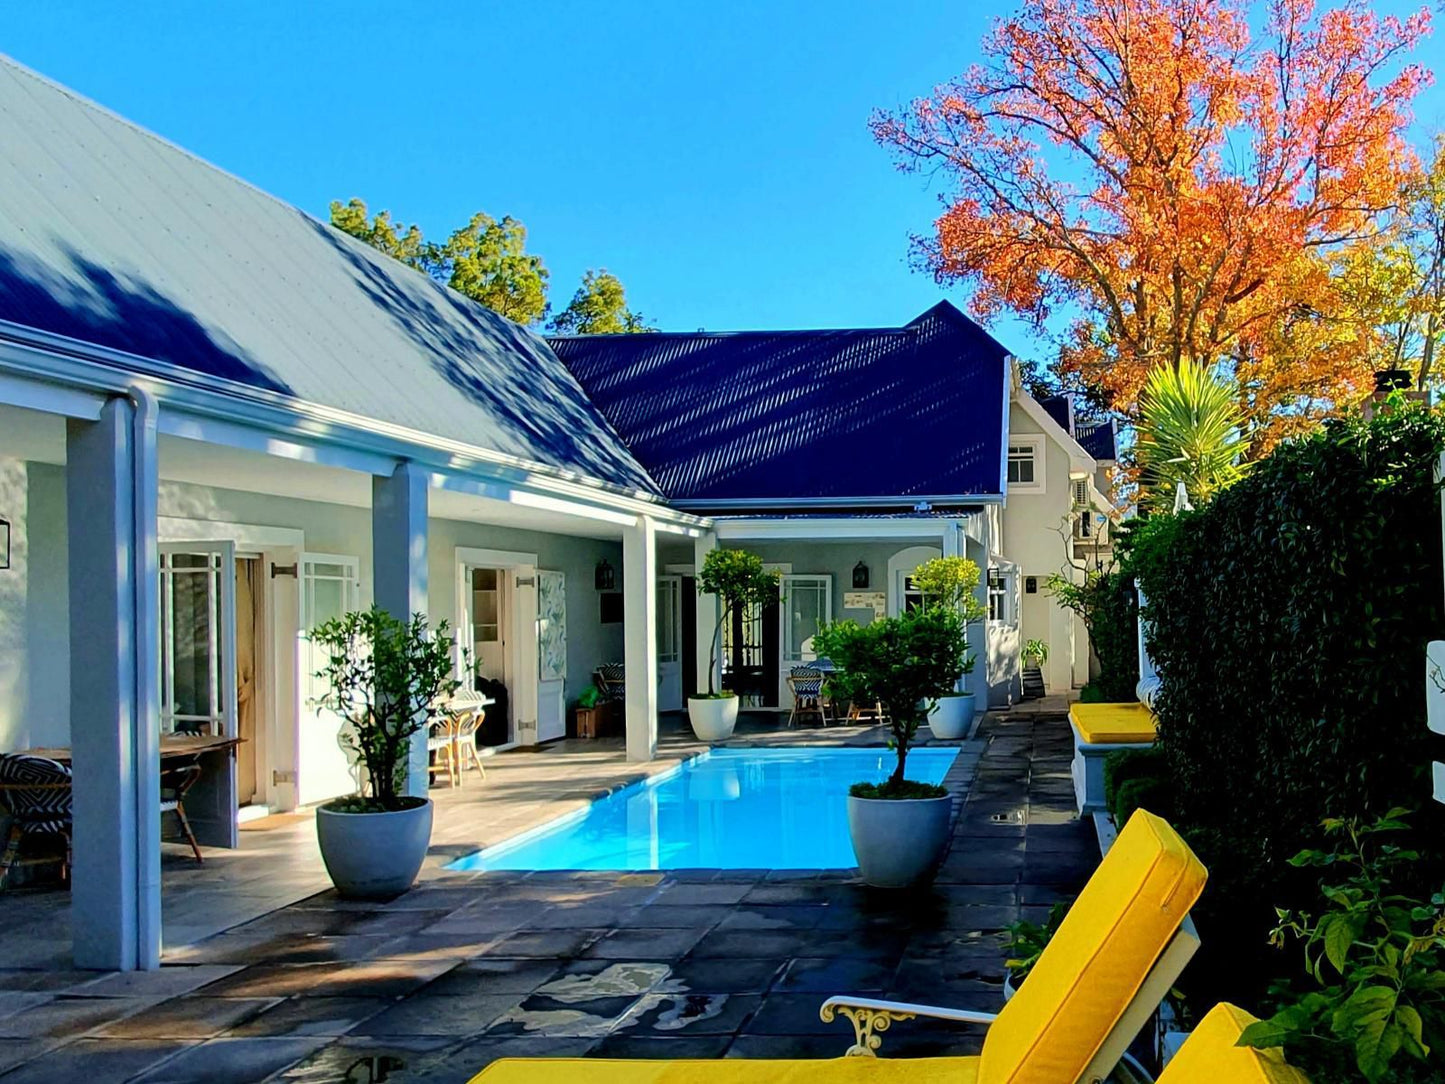 Fleur Du Soleil Luxury Guesthouse Franschhoek Western Cape South Africa Complementary Colors, House, Building, Architecture, Swimming Pool